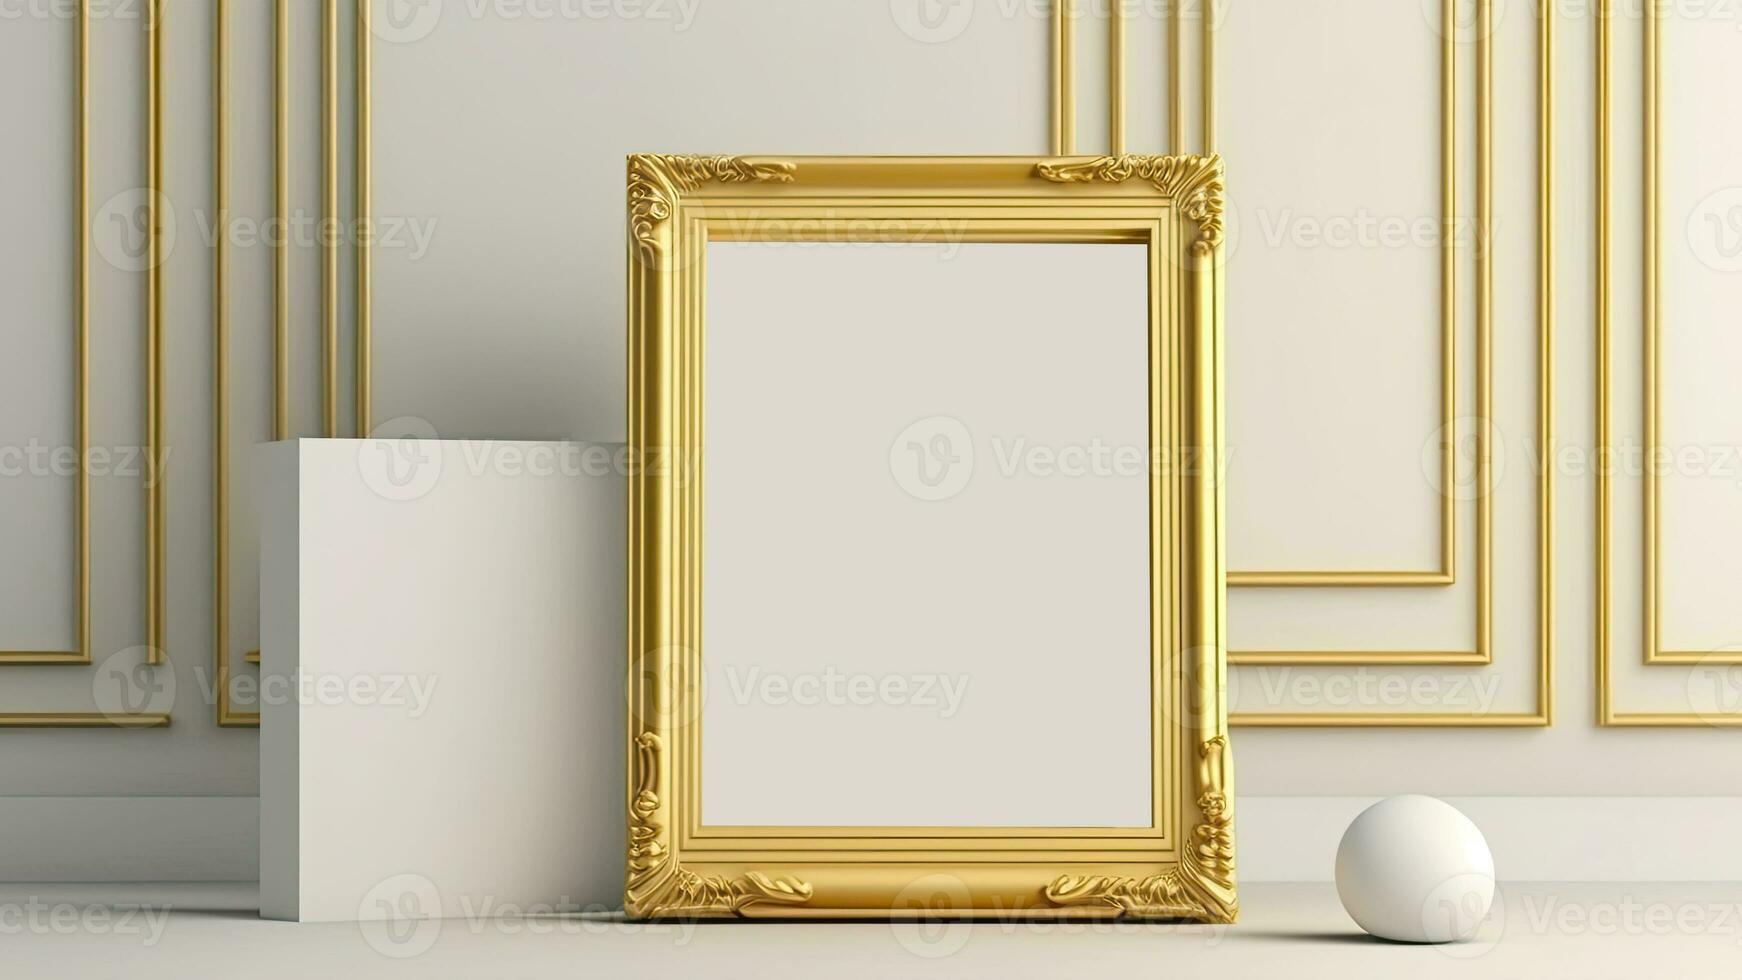 3D Render of Blank Golden Vintage Frame With Image Placeholder On Classic Interior Wall Mockup. photo